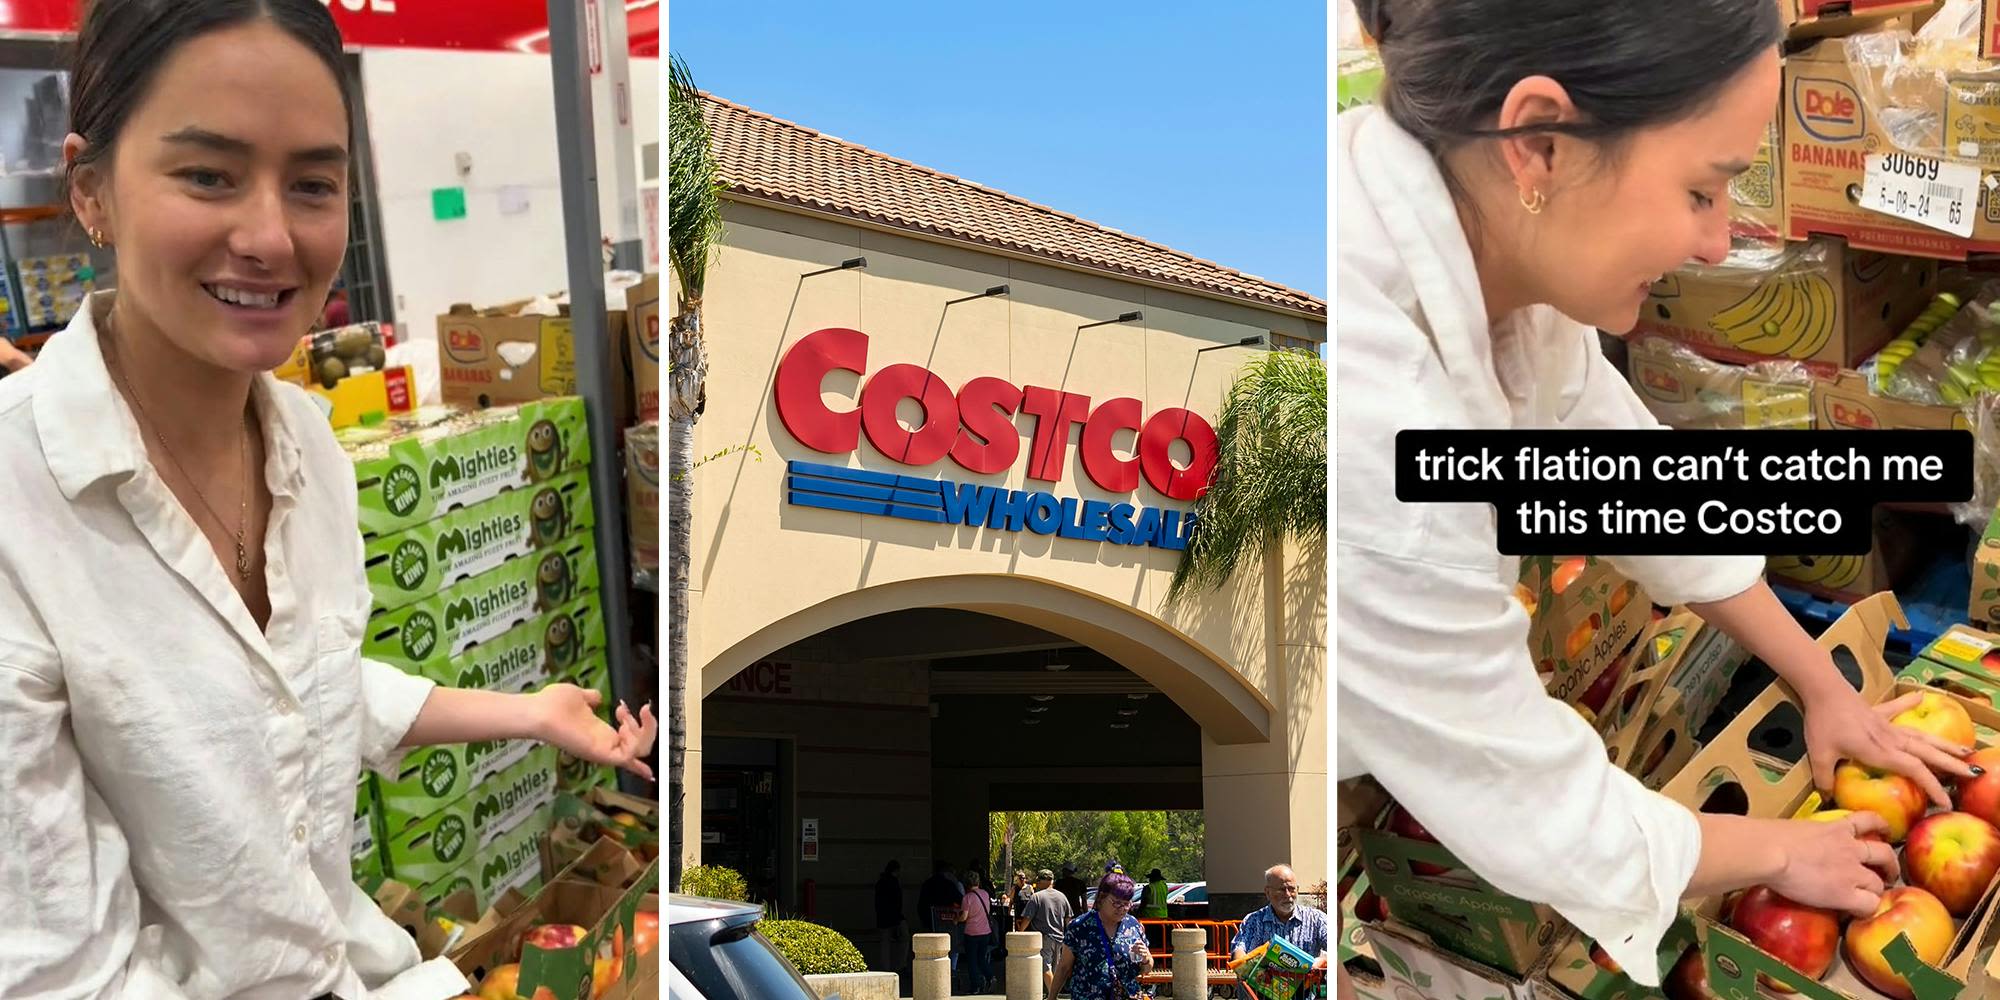 ‘They think they’re slick’: Viewers divided after woman shares her hack to avoiding ‘trickflation’ at Costco